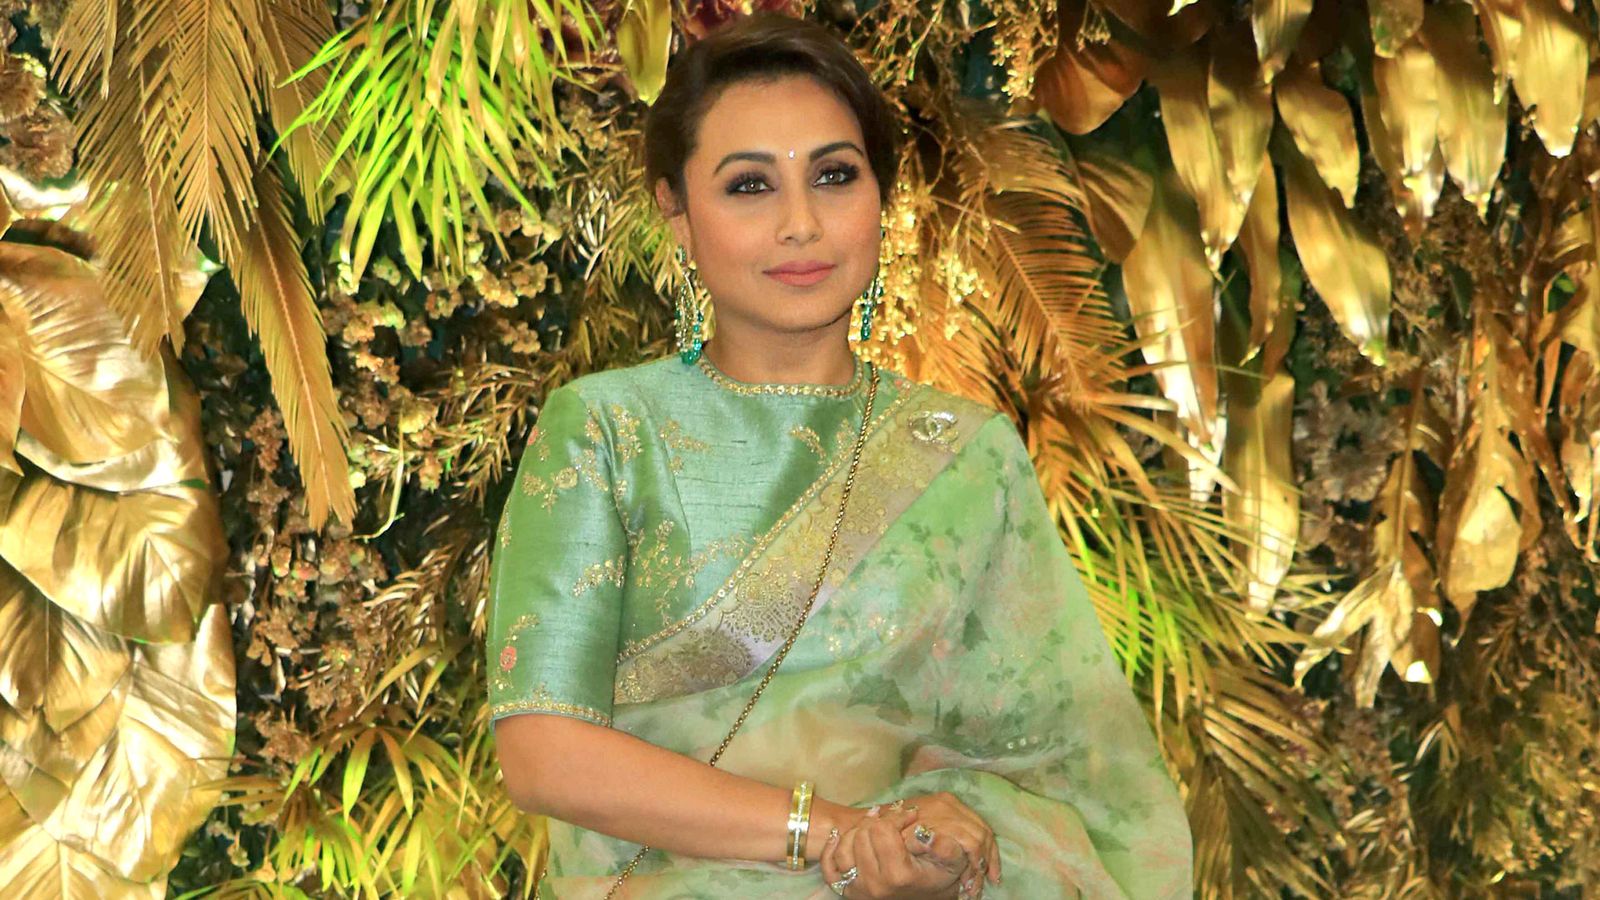 Rani Mukerji: ‘Through My Films I Was Given An Opportunity To Change Conversation Of Female Representation’